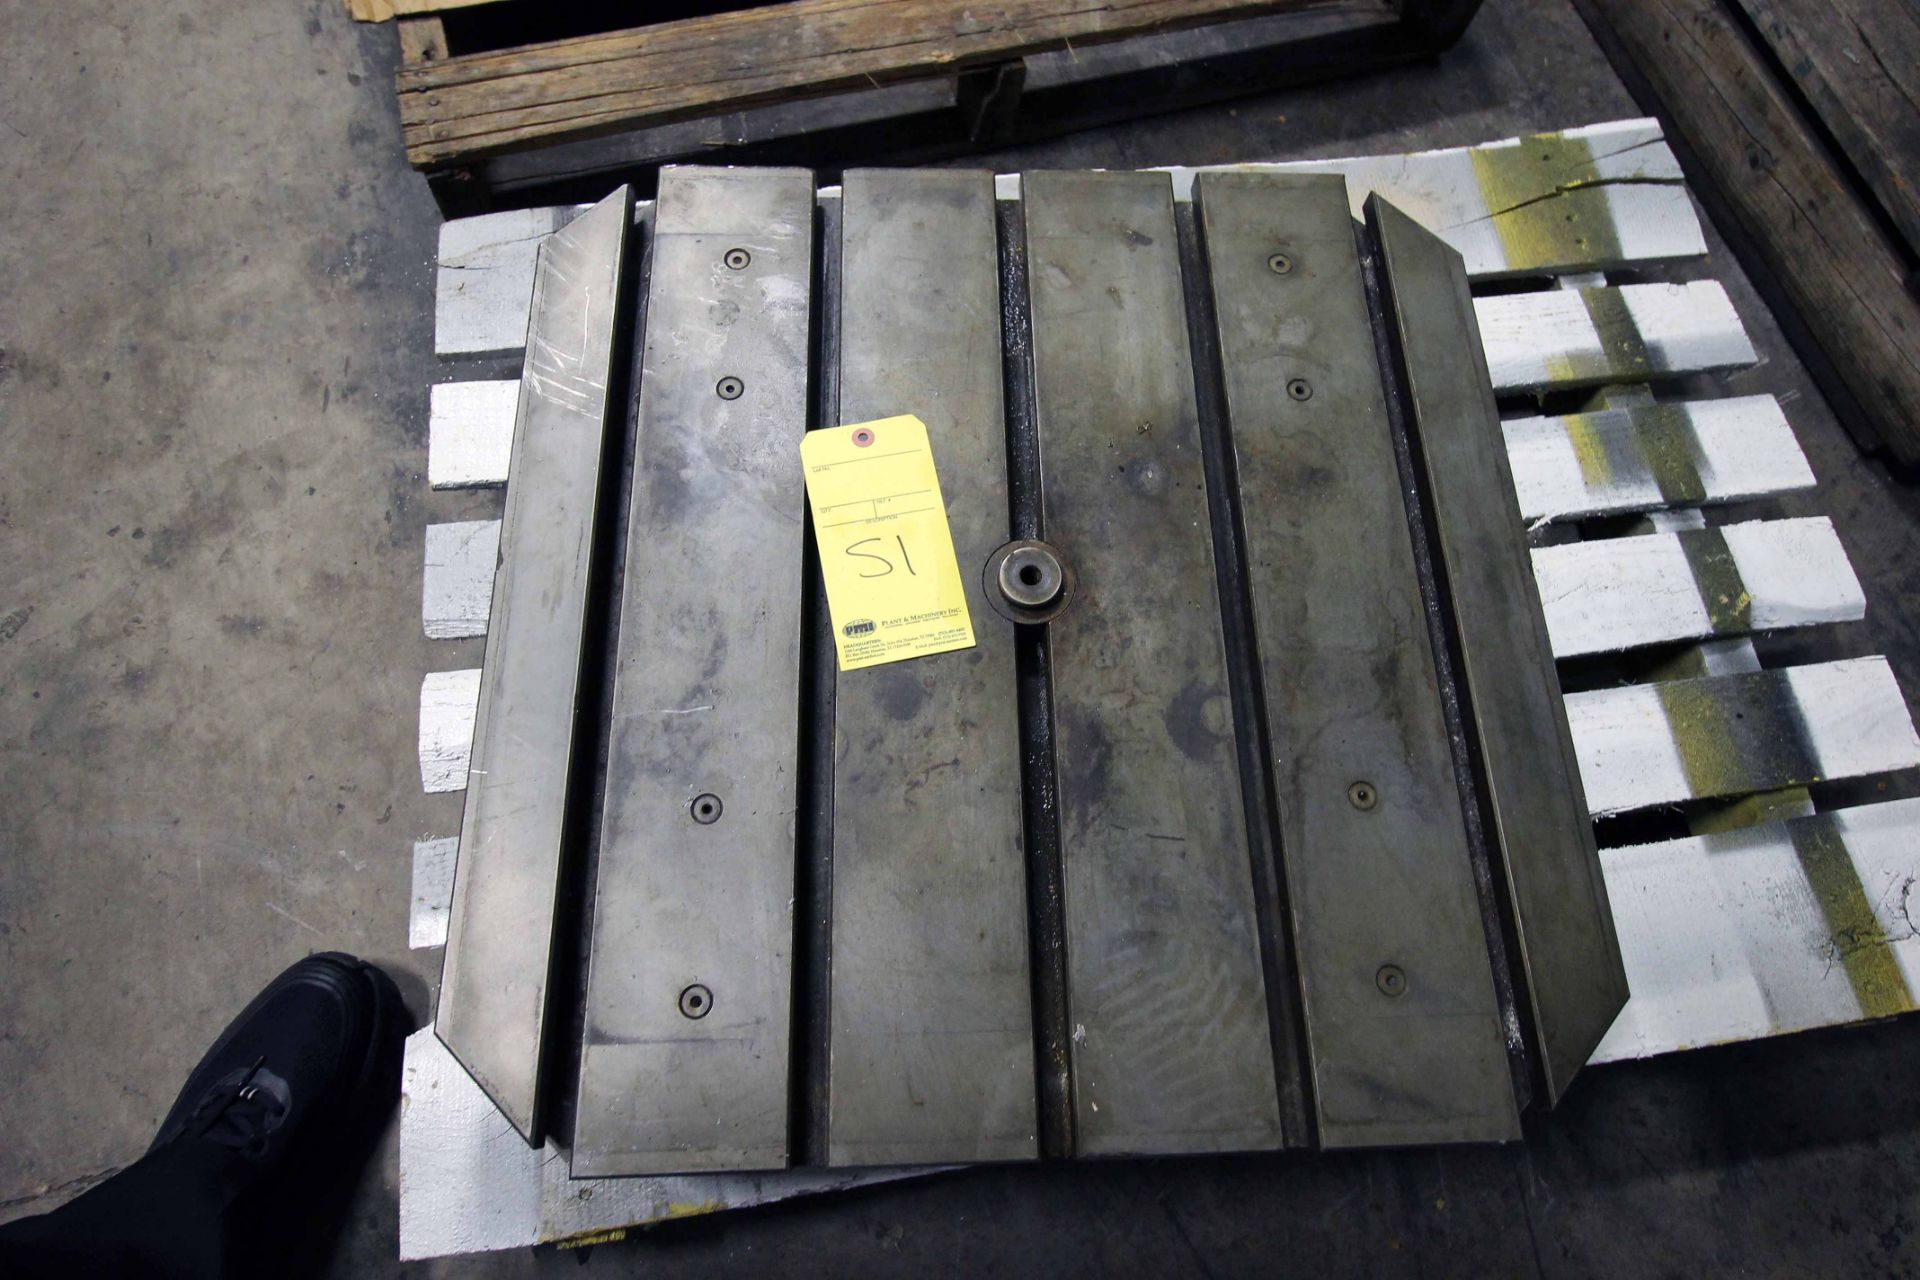 T-SLOTTED MACHINING CENTER PALLET, 24-1/2' x 24-1/2'